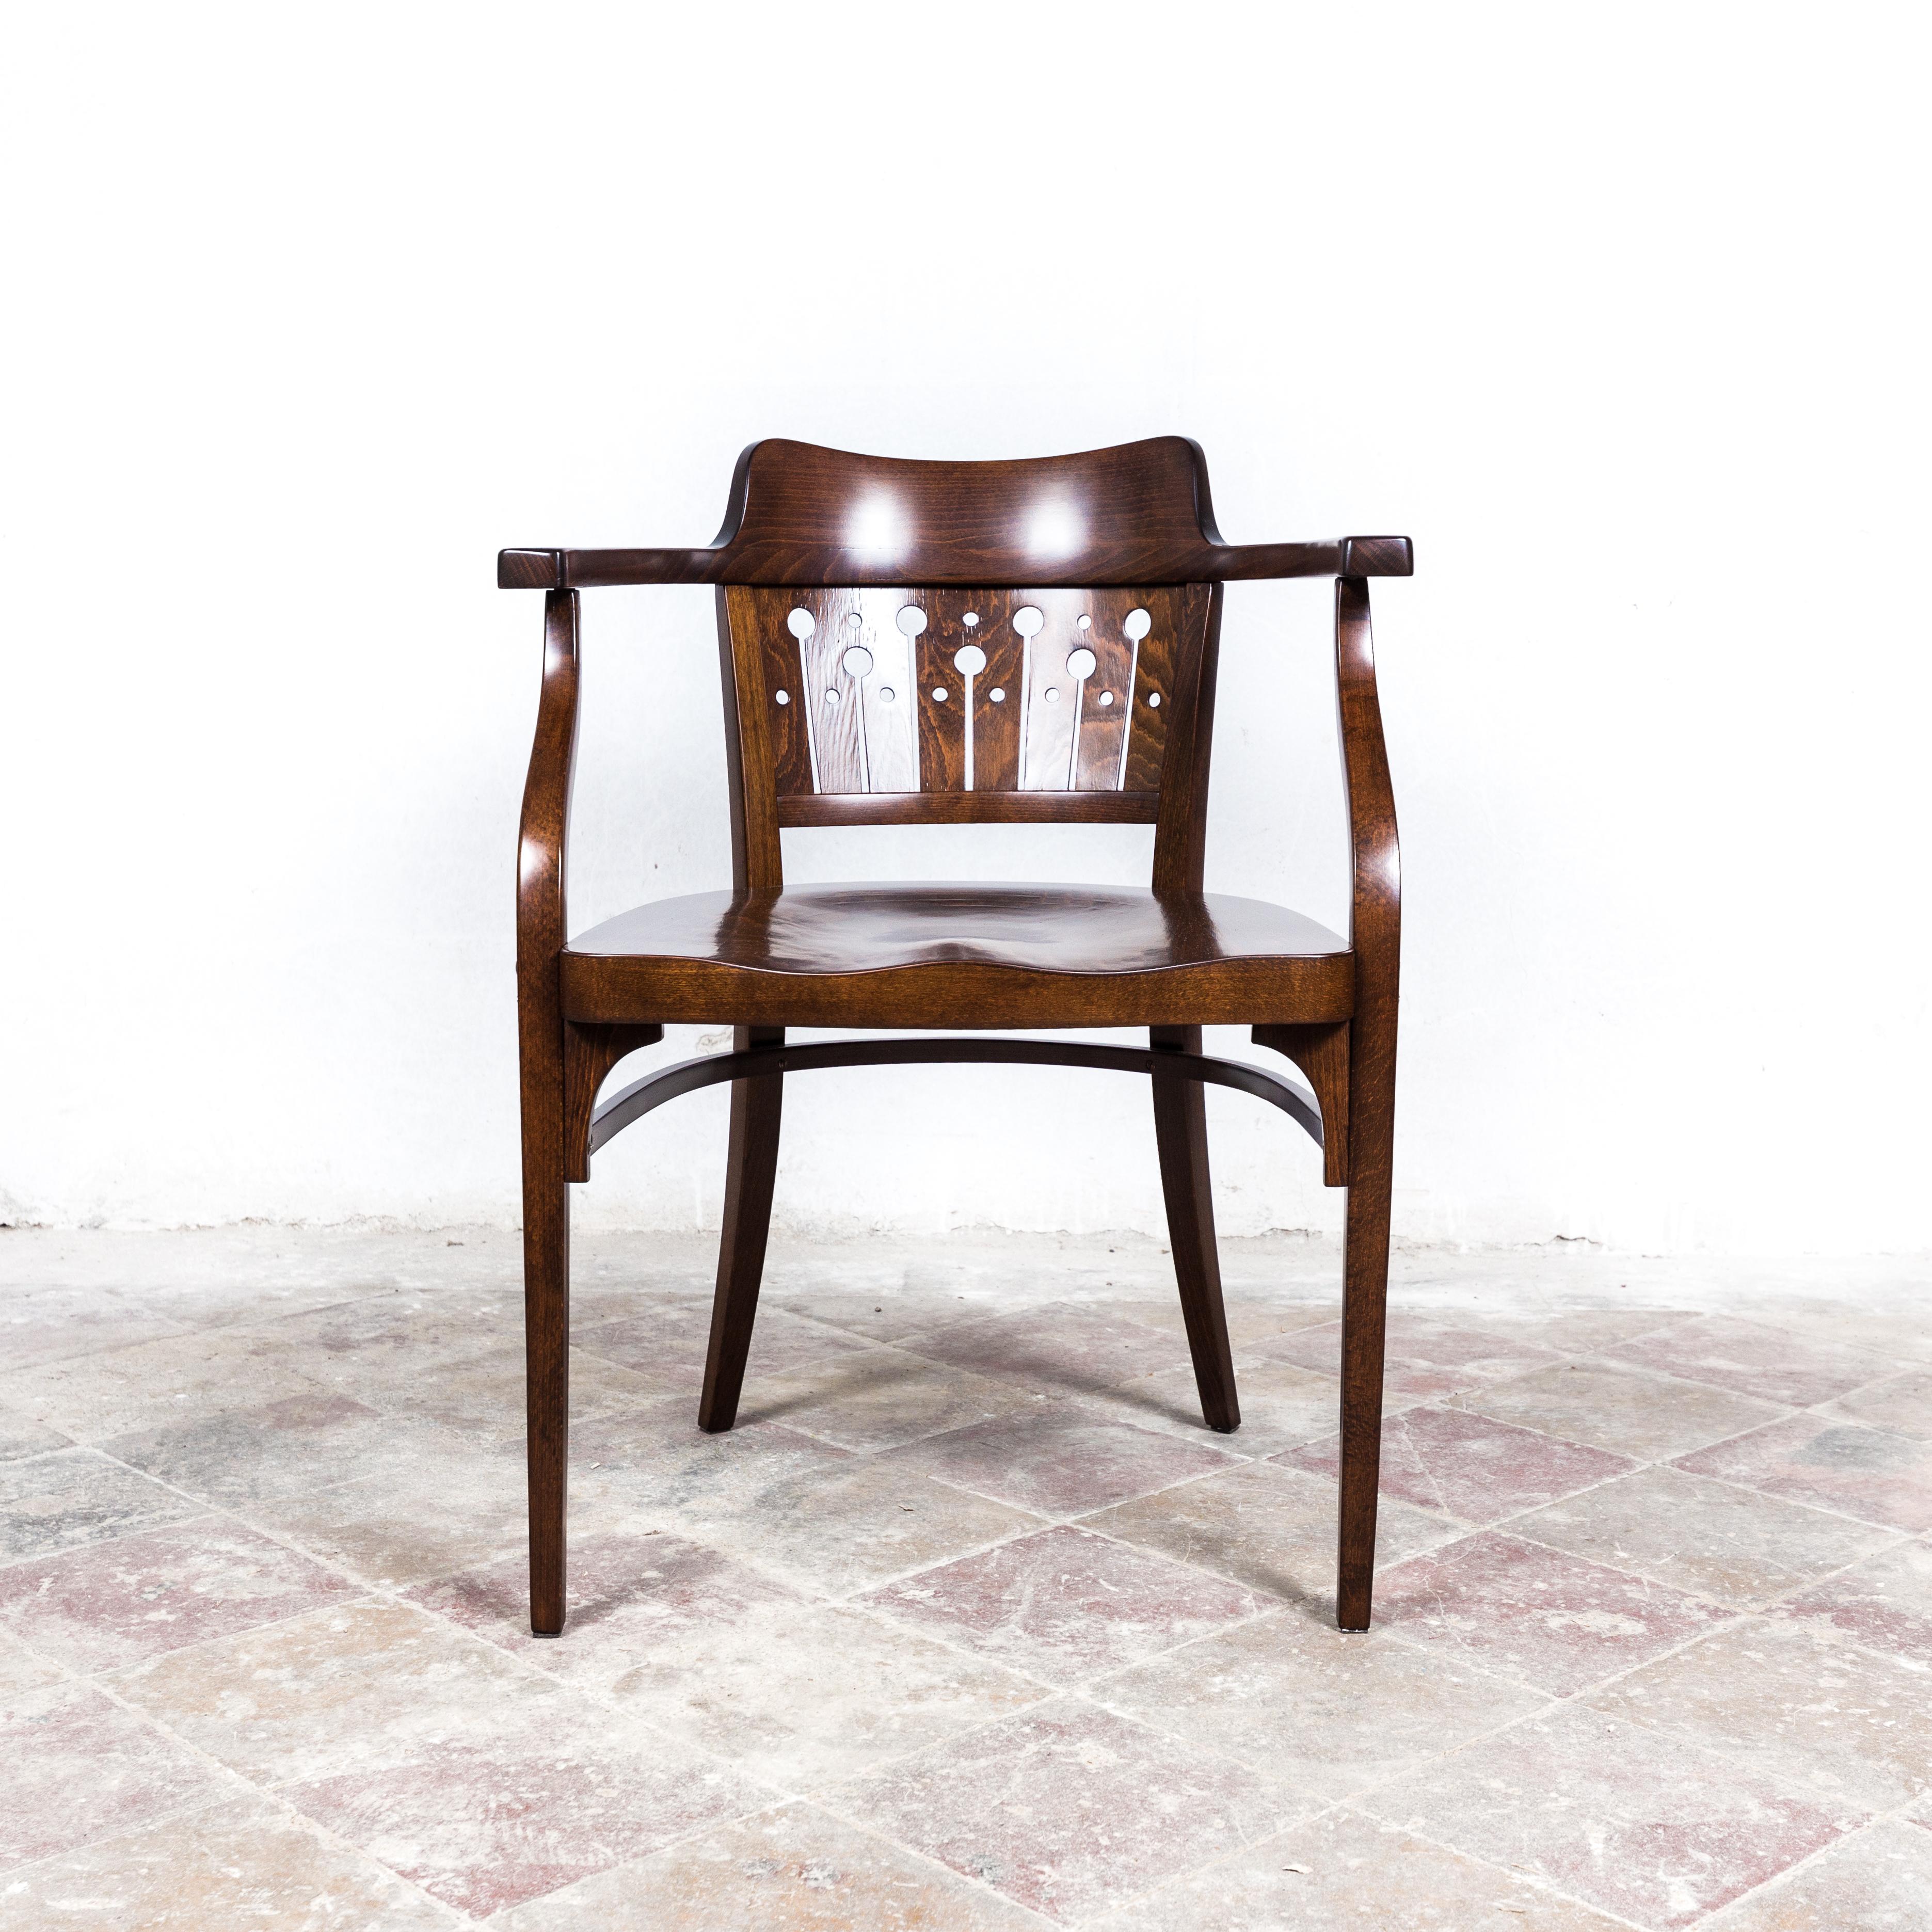 Rare armchair from one of Vienna Secession most significant architects, creator of famous Postal saving bank in Vienna. The chair was expertly restored by a professional studio with long history of preserving rare and unique pieces. In perfect